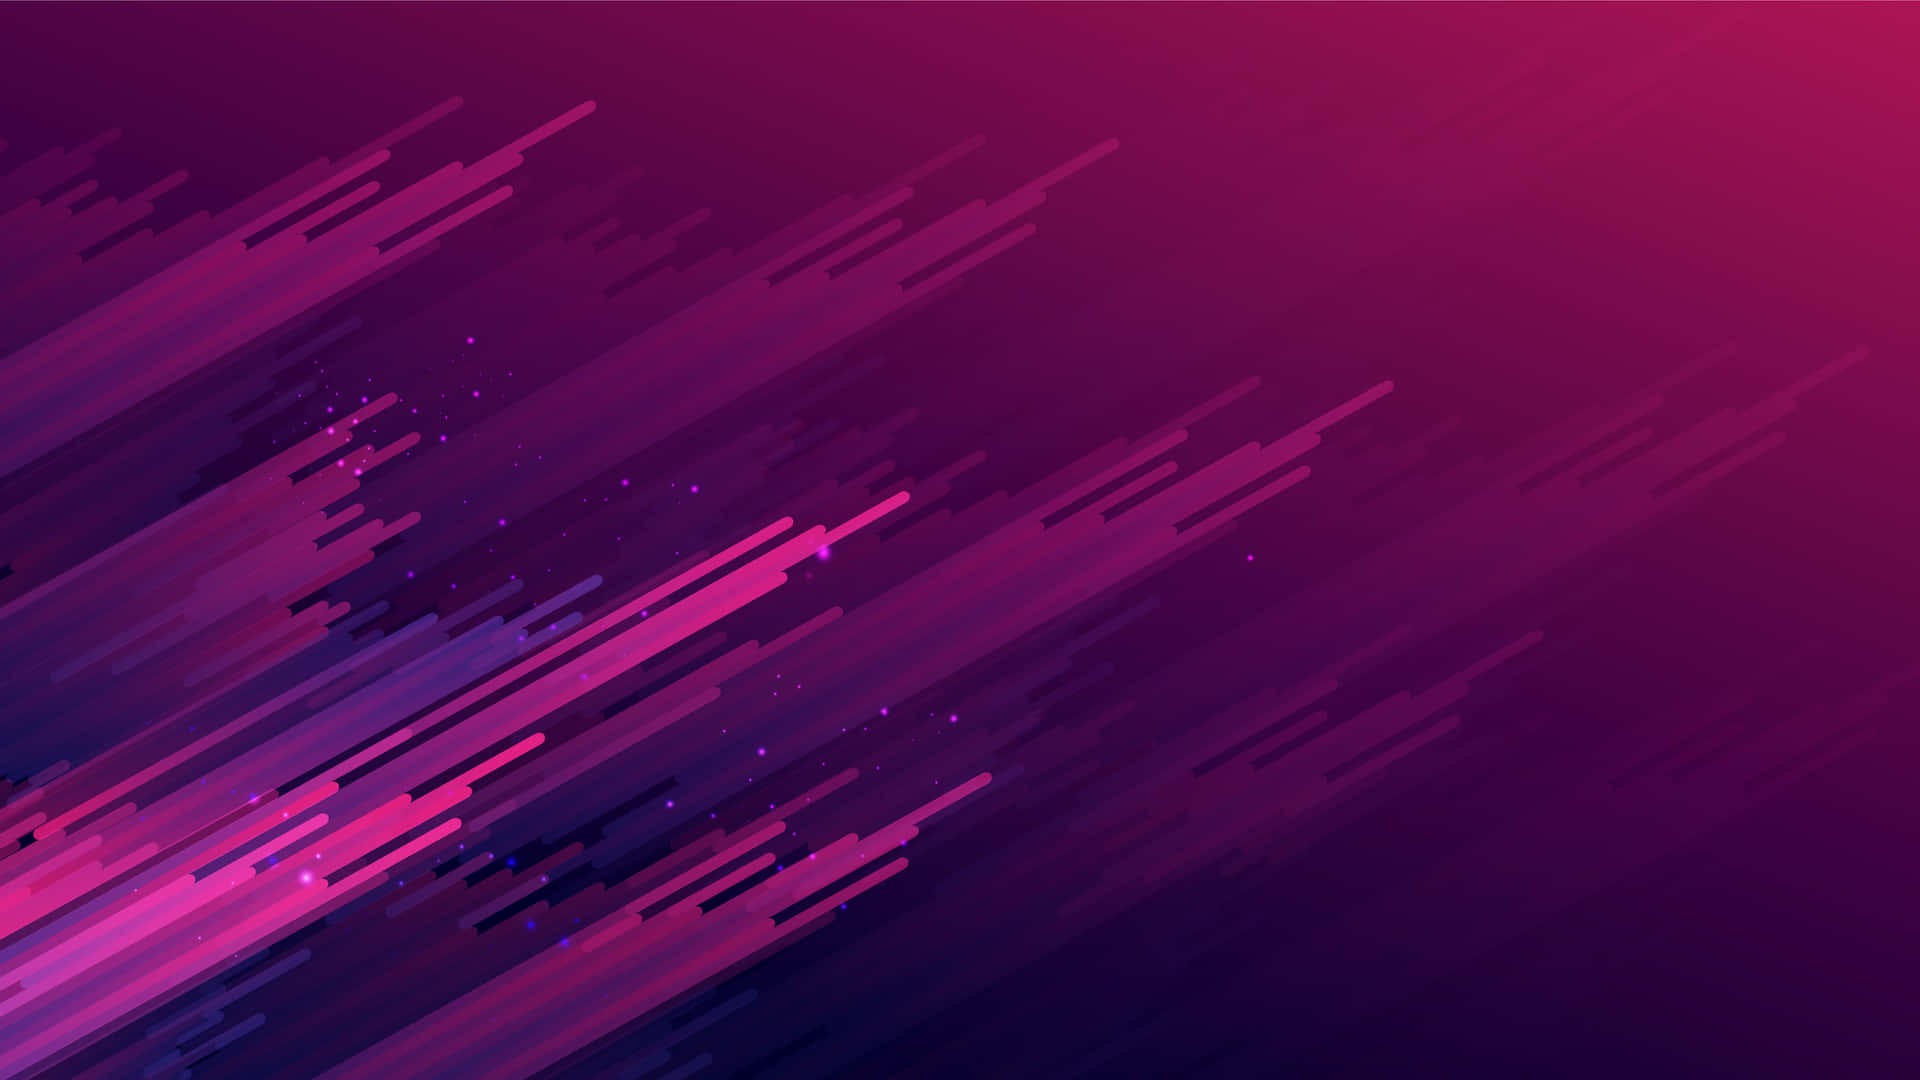 A beautiful purple and pink abstract background